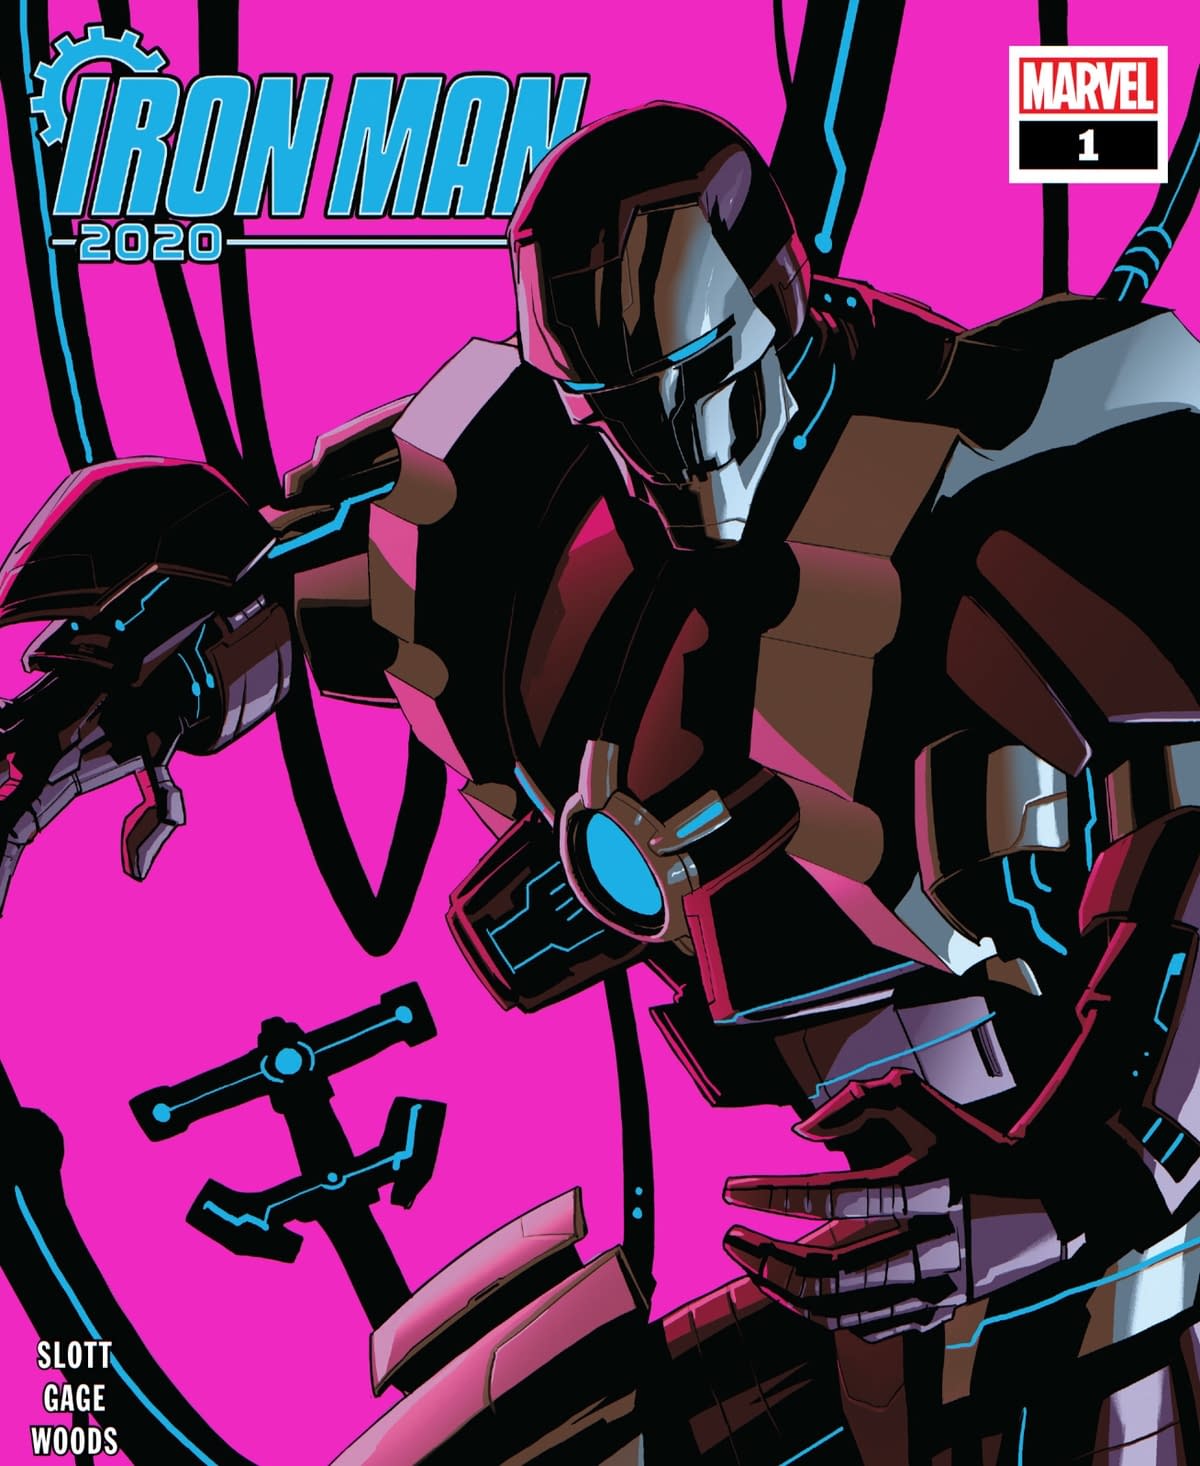 REVIEW: Iron Man 2020 #1 -- "Rude, Boorish, Entitled, Rich, Unrestrained, Motivated"